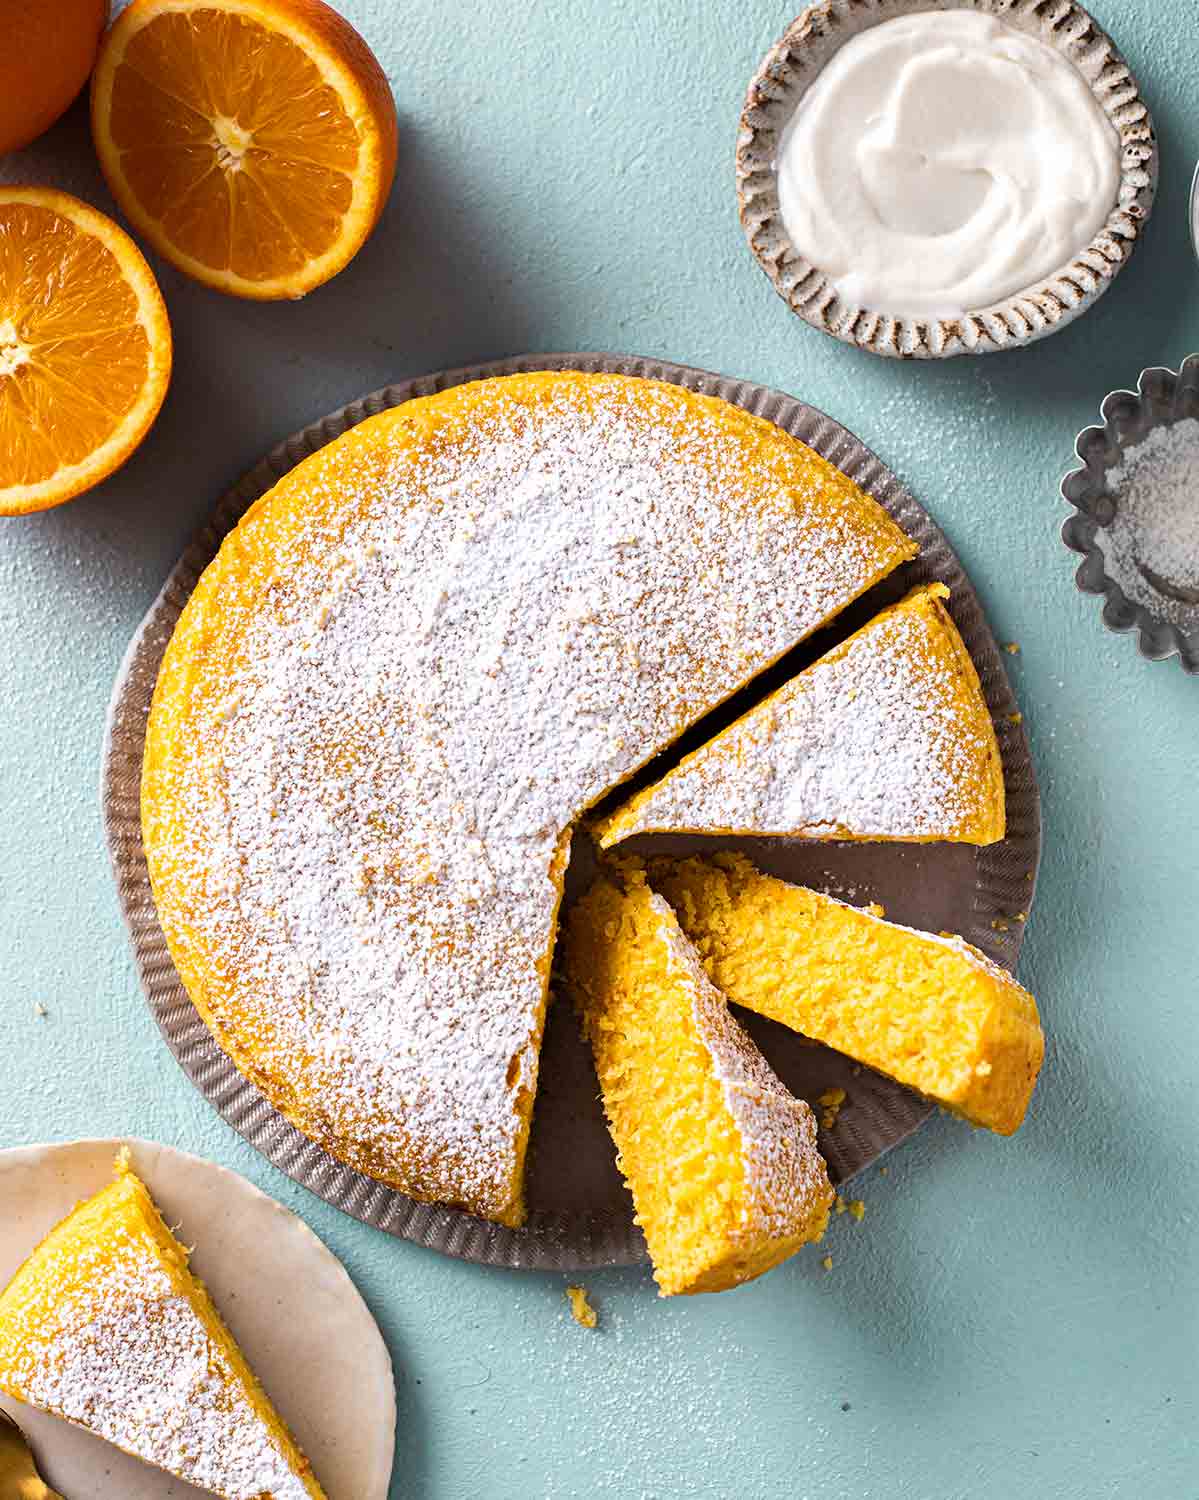 Simple vegan orange cake dusted with powdered sugar on plate with a few slices coming out showing beautiful orange hue.